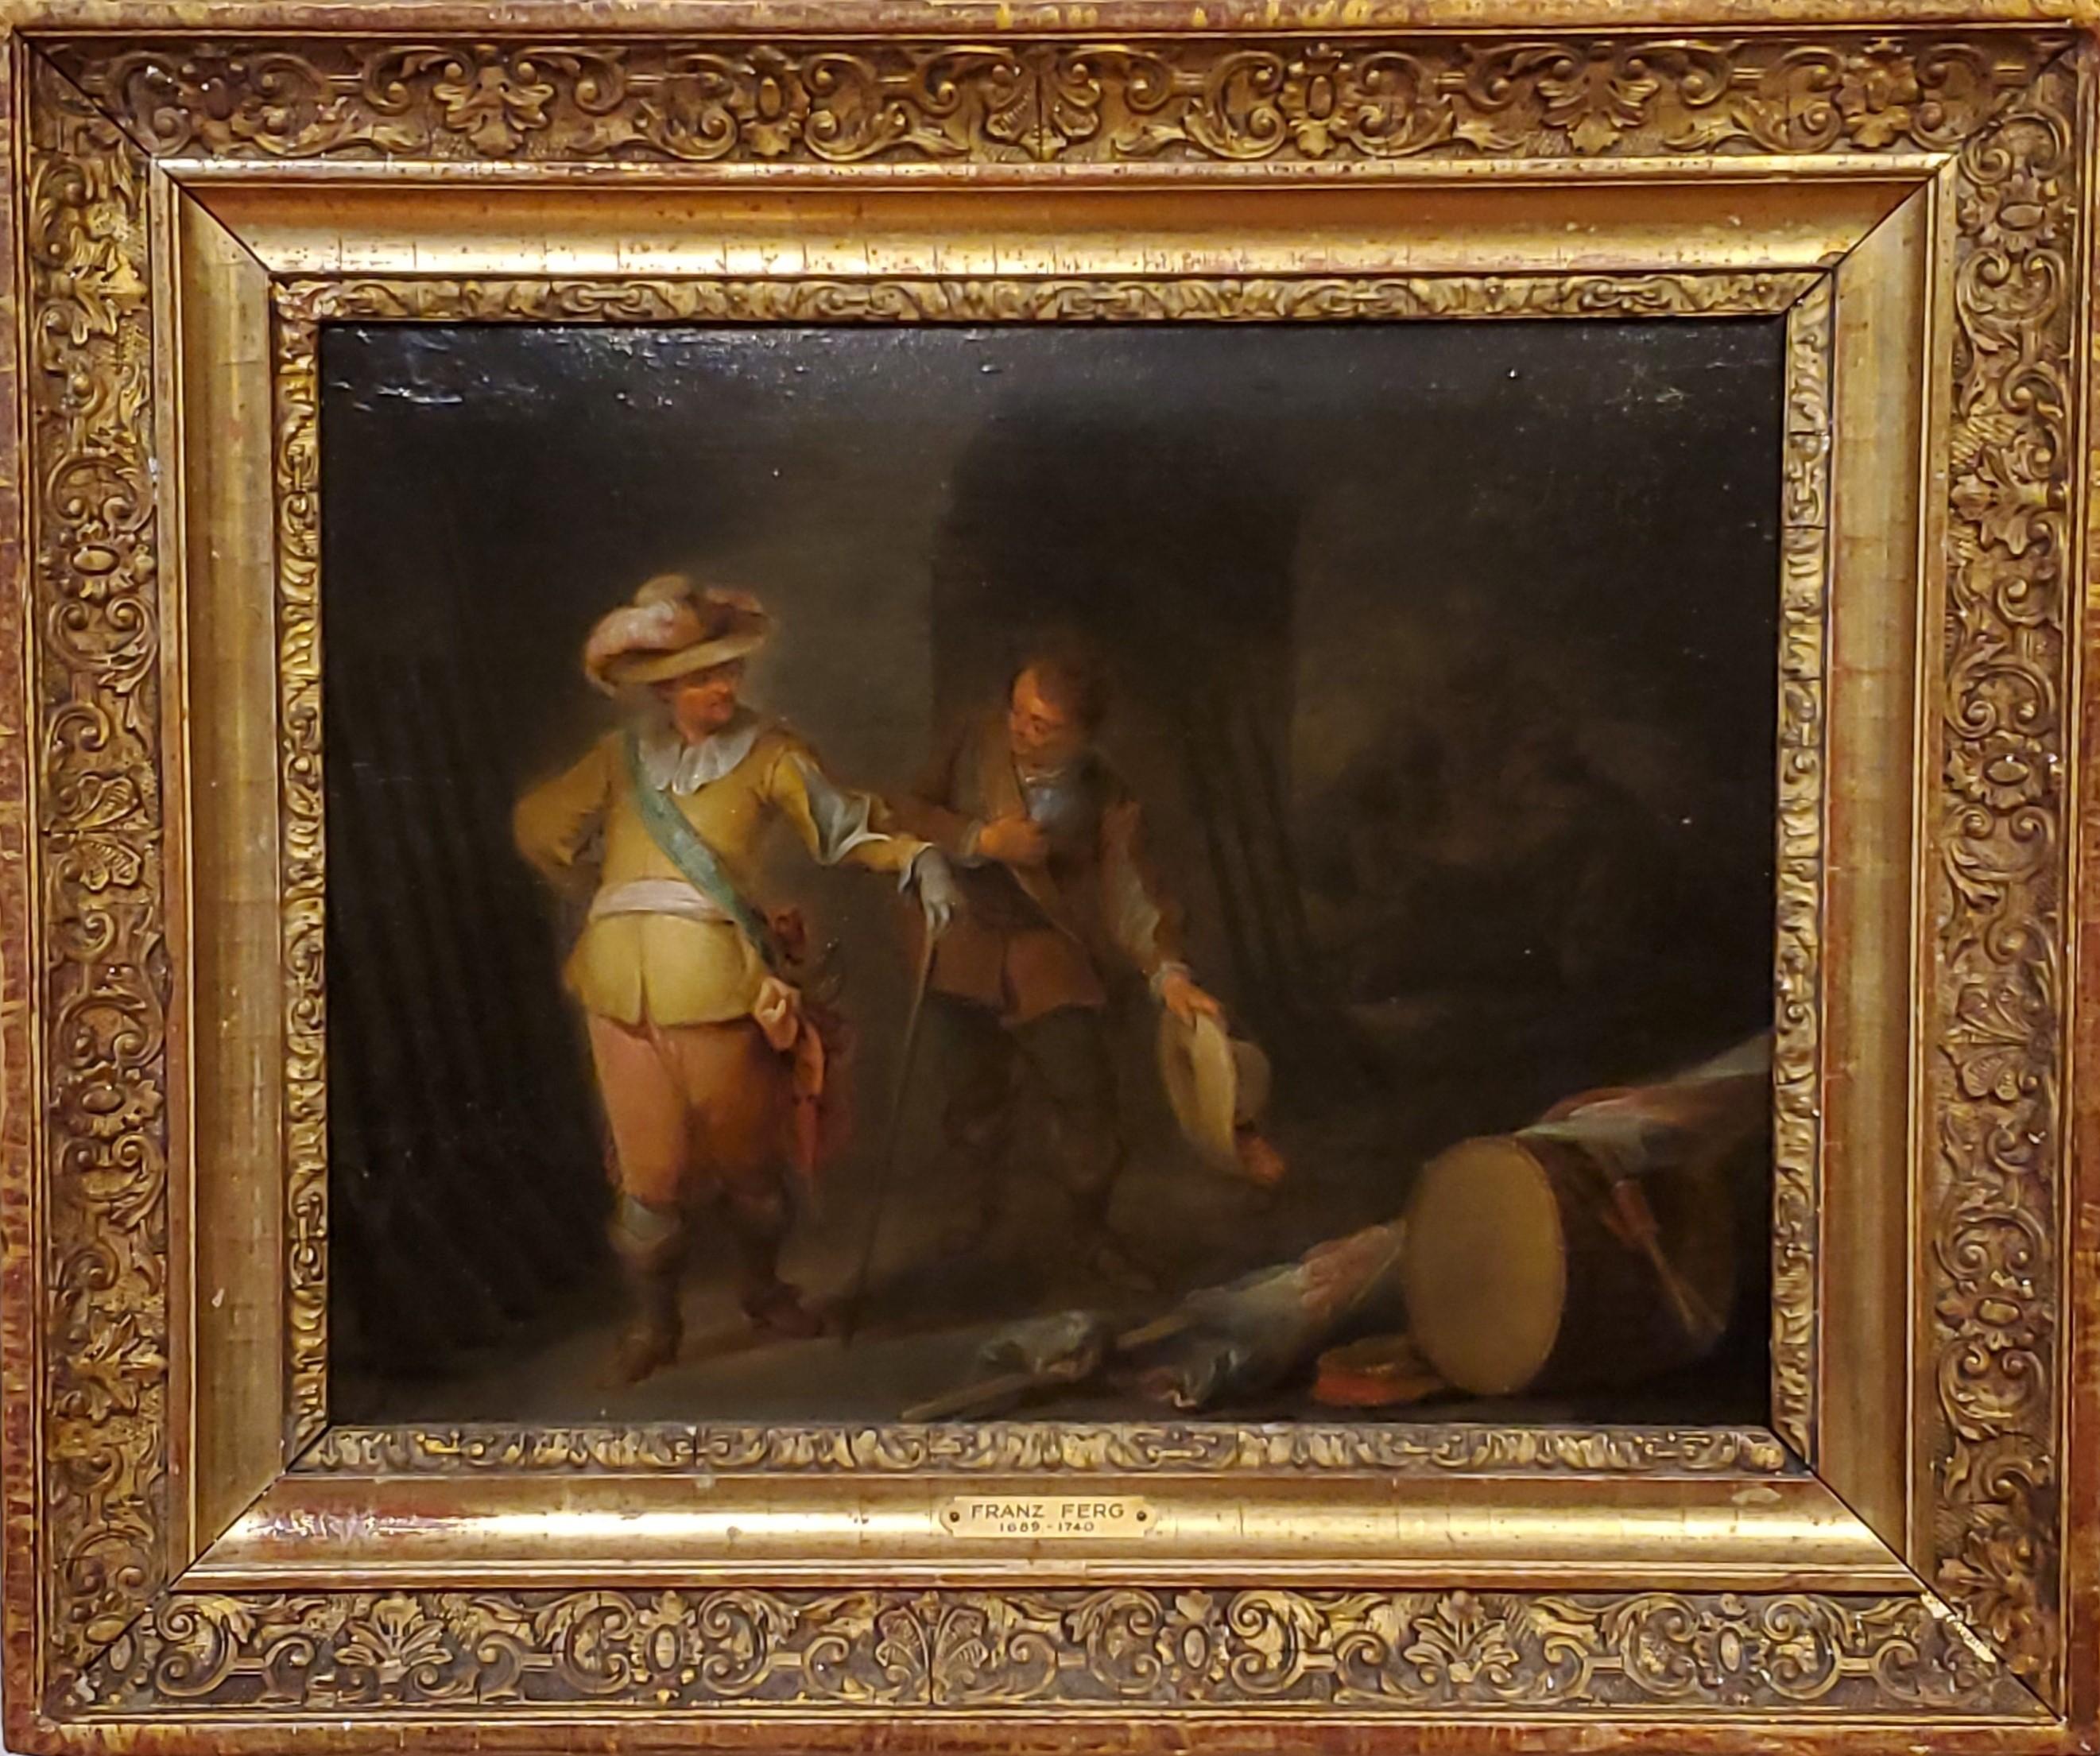 An Old Master Oil Painting on Wood Panel of an armory inspection by Franz de Paula Ferg in 1730.

Approximately 10" x 13" oil on wood panel signed in the lower left corner.

In the frame the antique oil painting is 15" tall by 18" wide.

Franz de